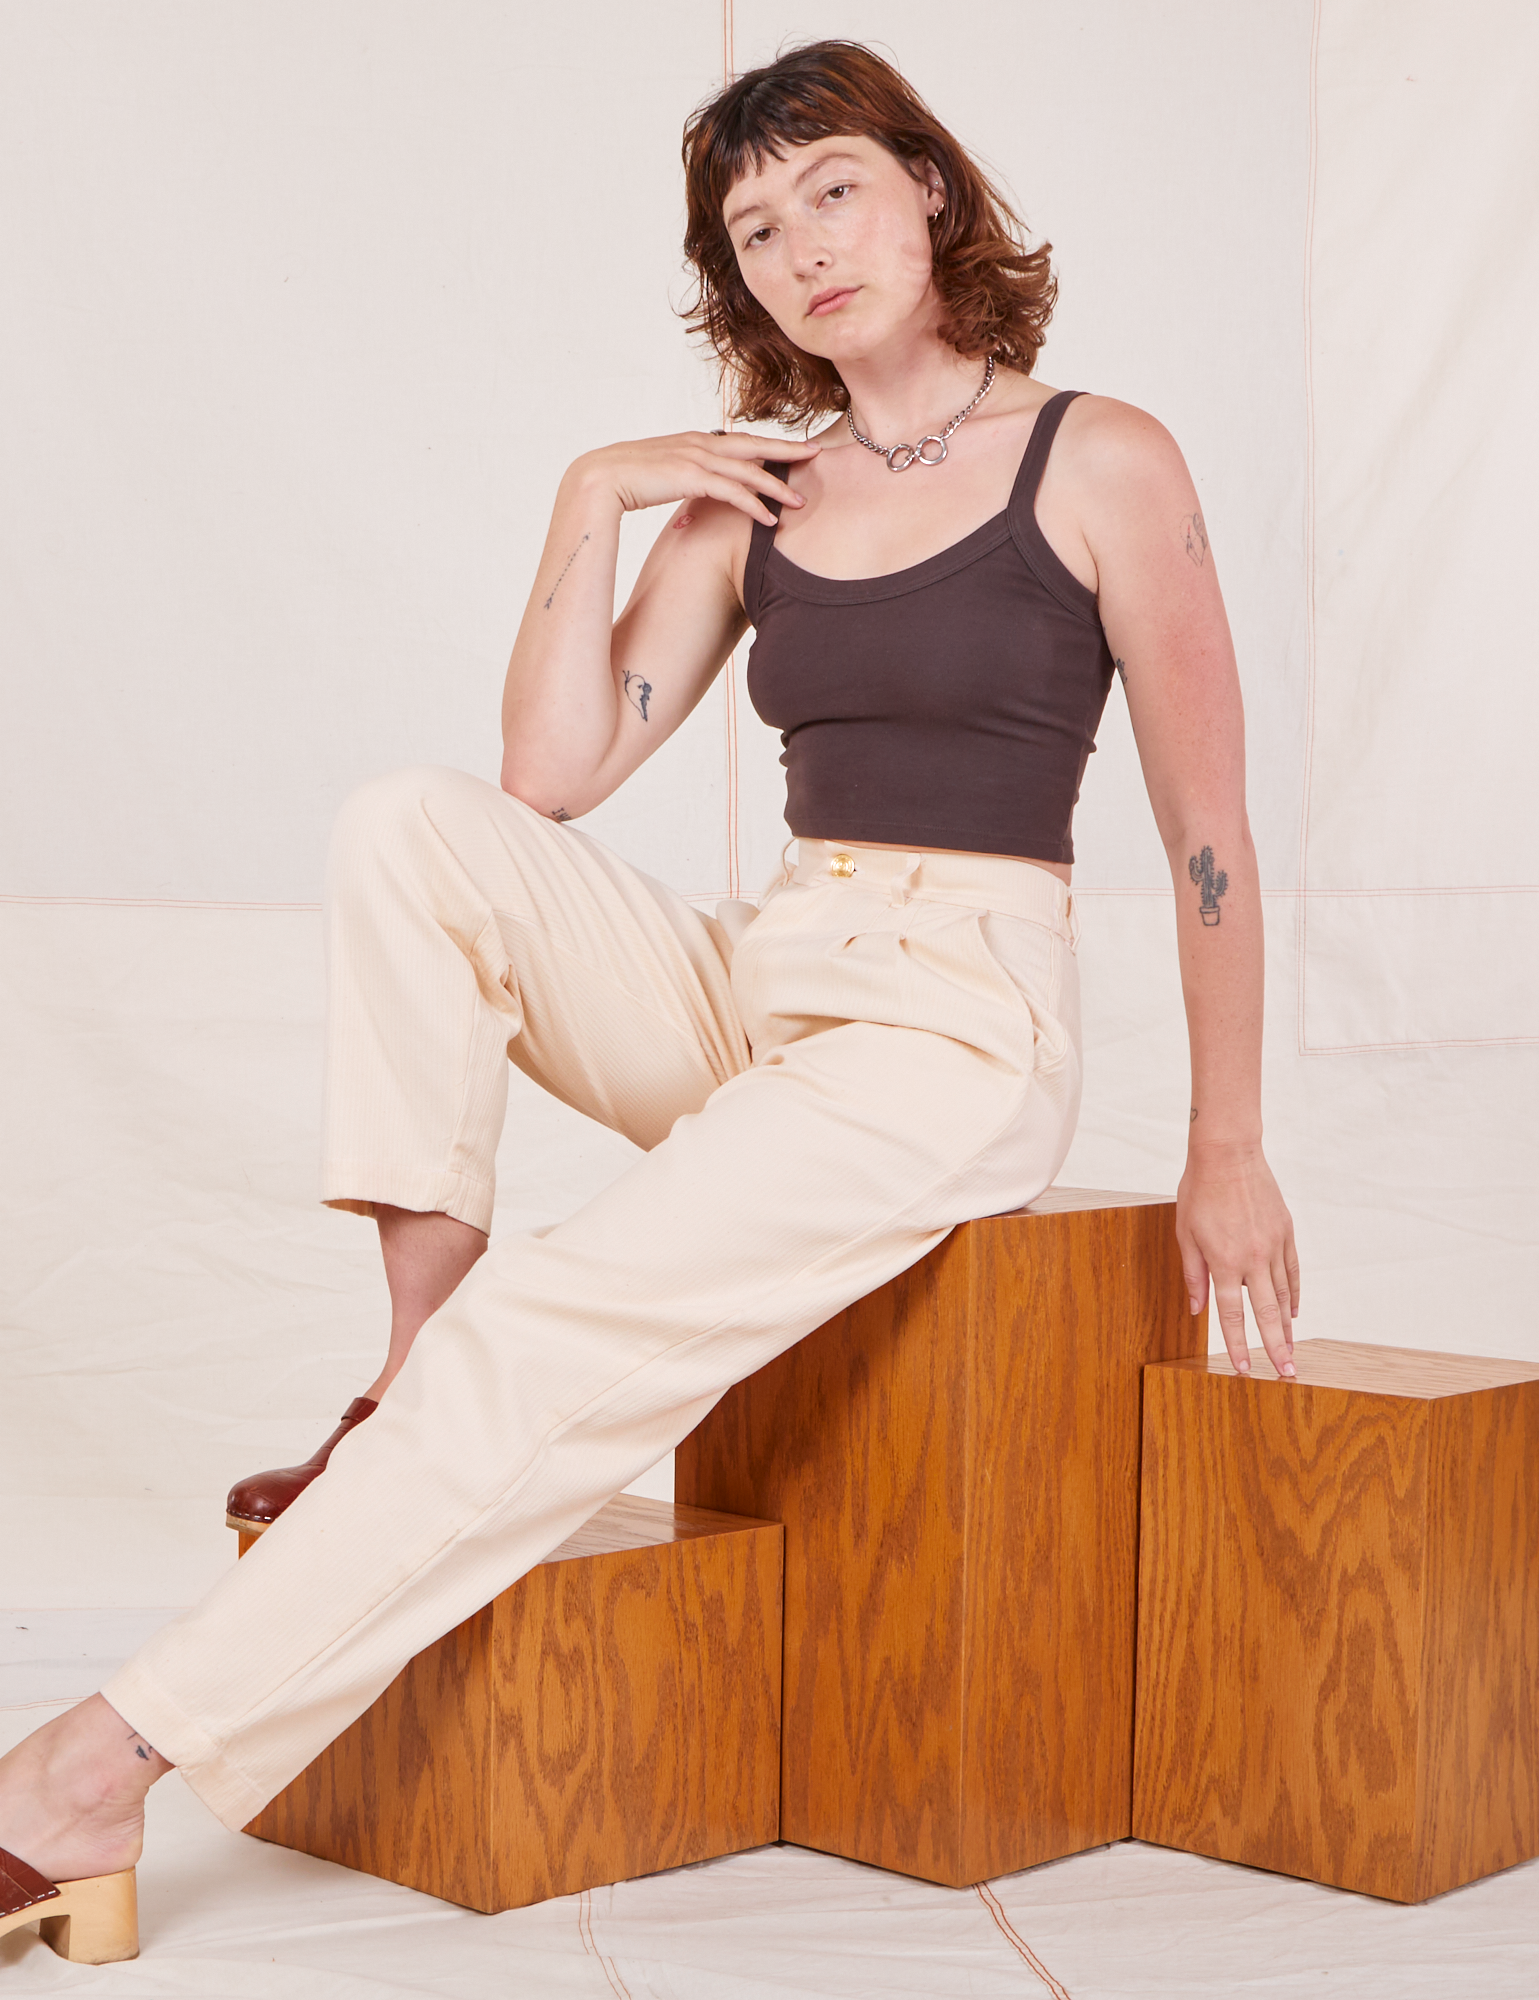 Alex is wearing Heritage Trousers in Vintage Off-White and espresso brown Cropped Cami